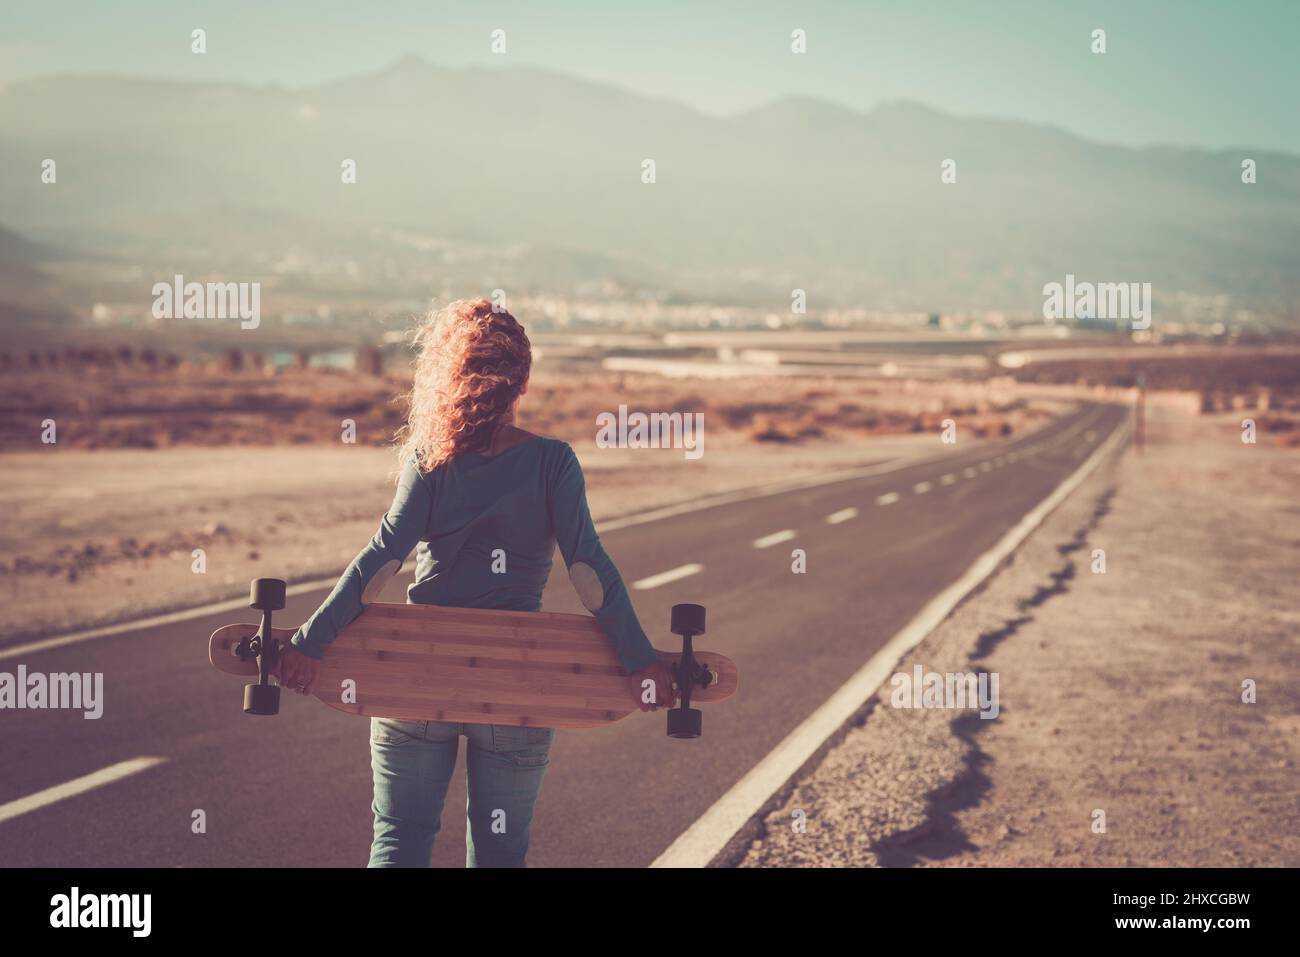 Woman, back view, longboard, hold, stand, country road, Stock Photo